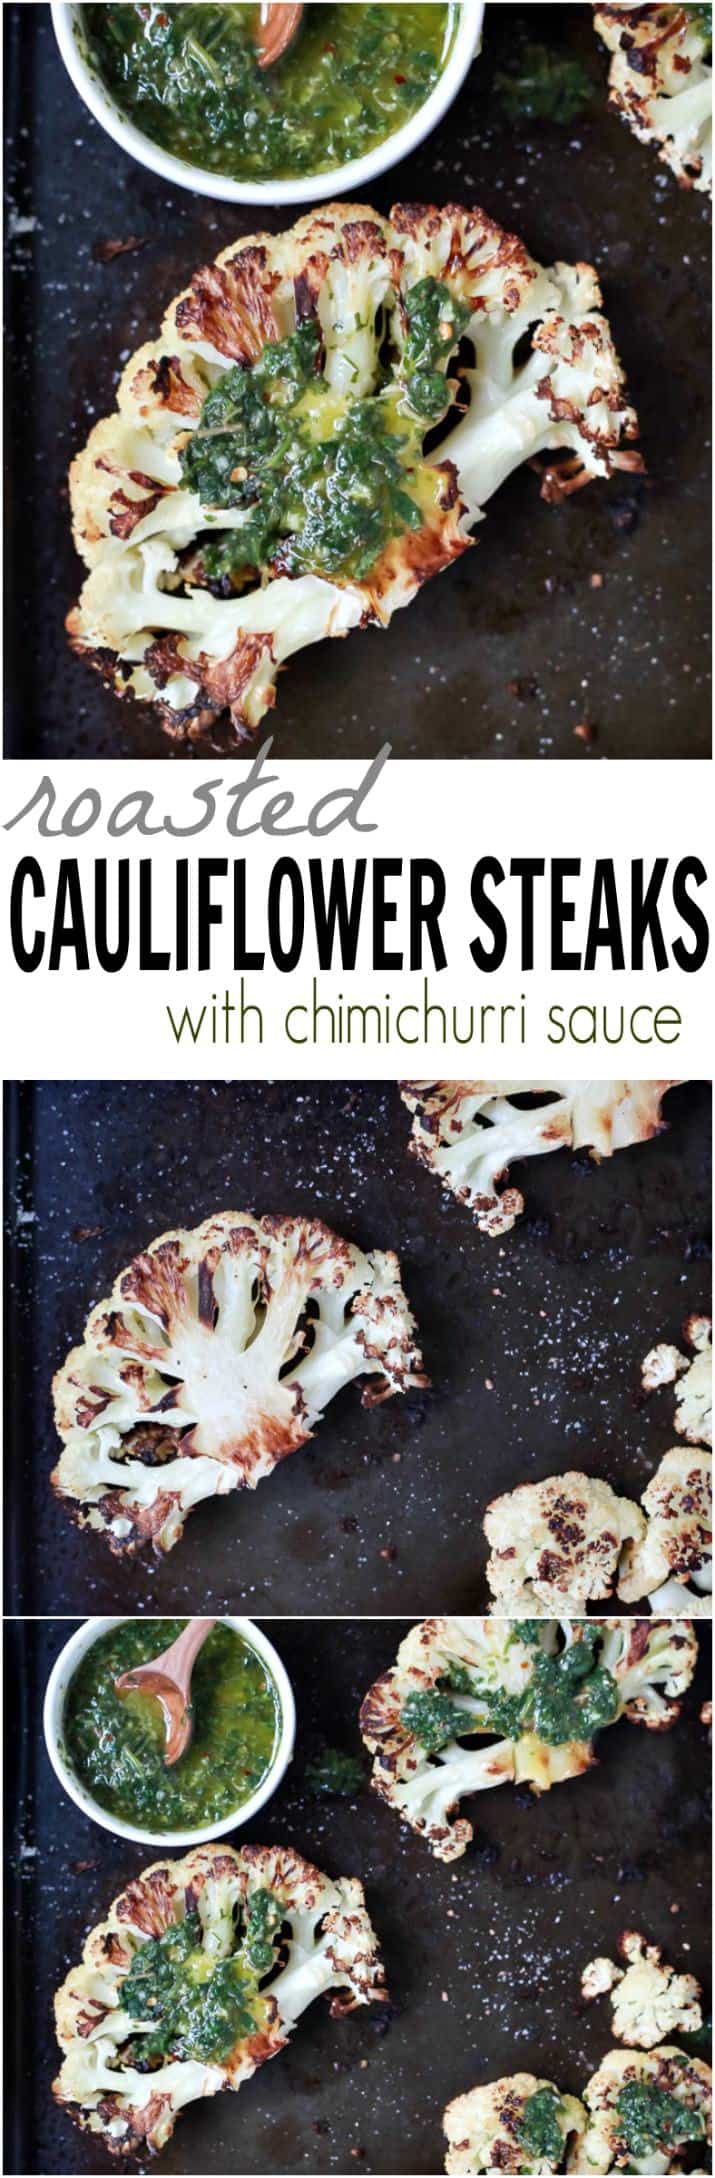 Easy naturally Gluten Free Roasted Cauliflower Steaks topped with fresh zesty Chimichurri Sauce at only 106 calories. Who knew Cauliflower could taste so good! This recipe is down right addicting! | joyfulhealthyeats.com